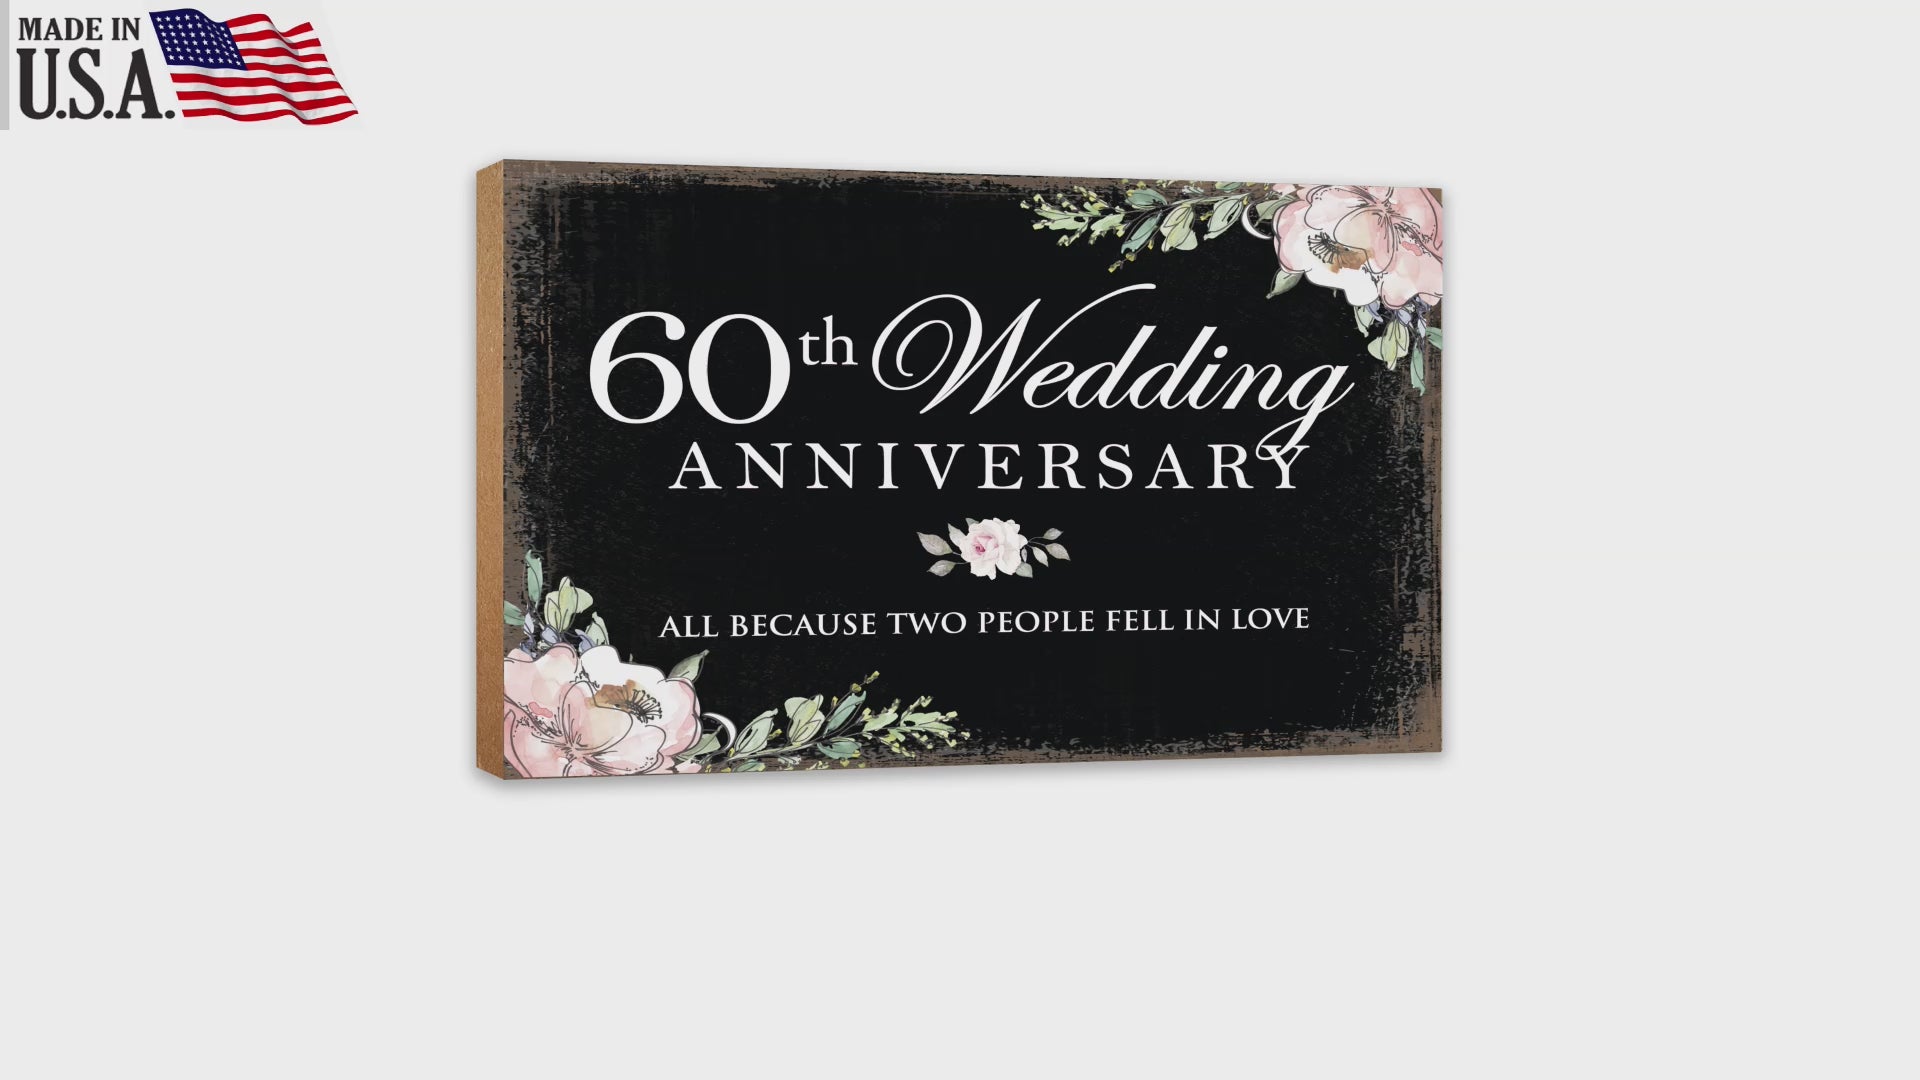 60th Wedding Anniversary Unique Shelf Decor and Tabletop Signs Gift for Couples - Fell In Love